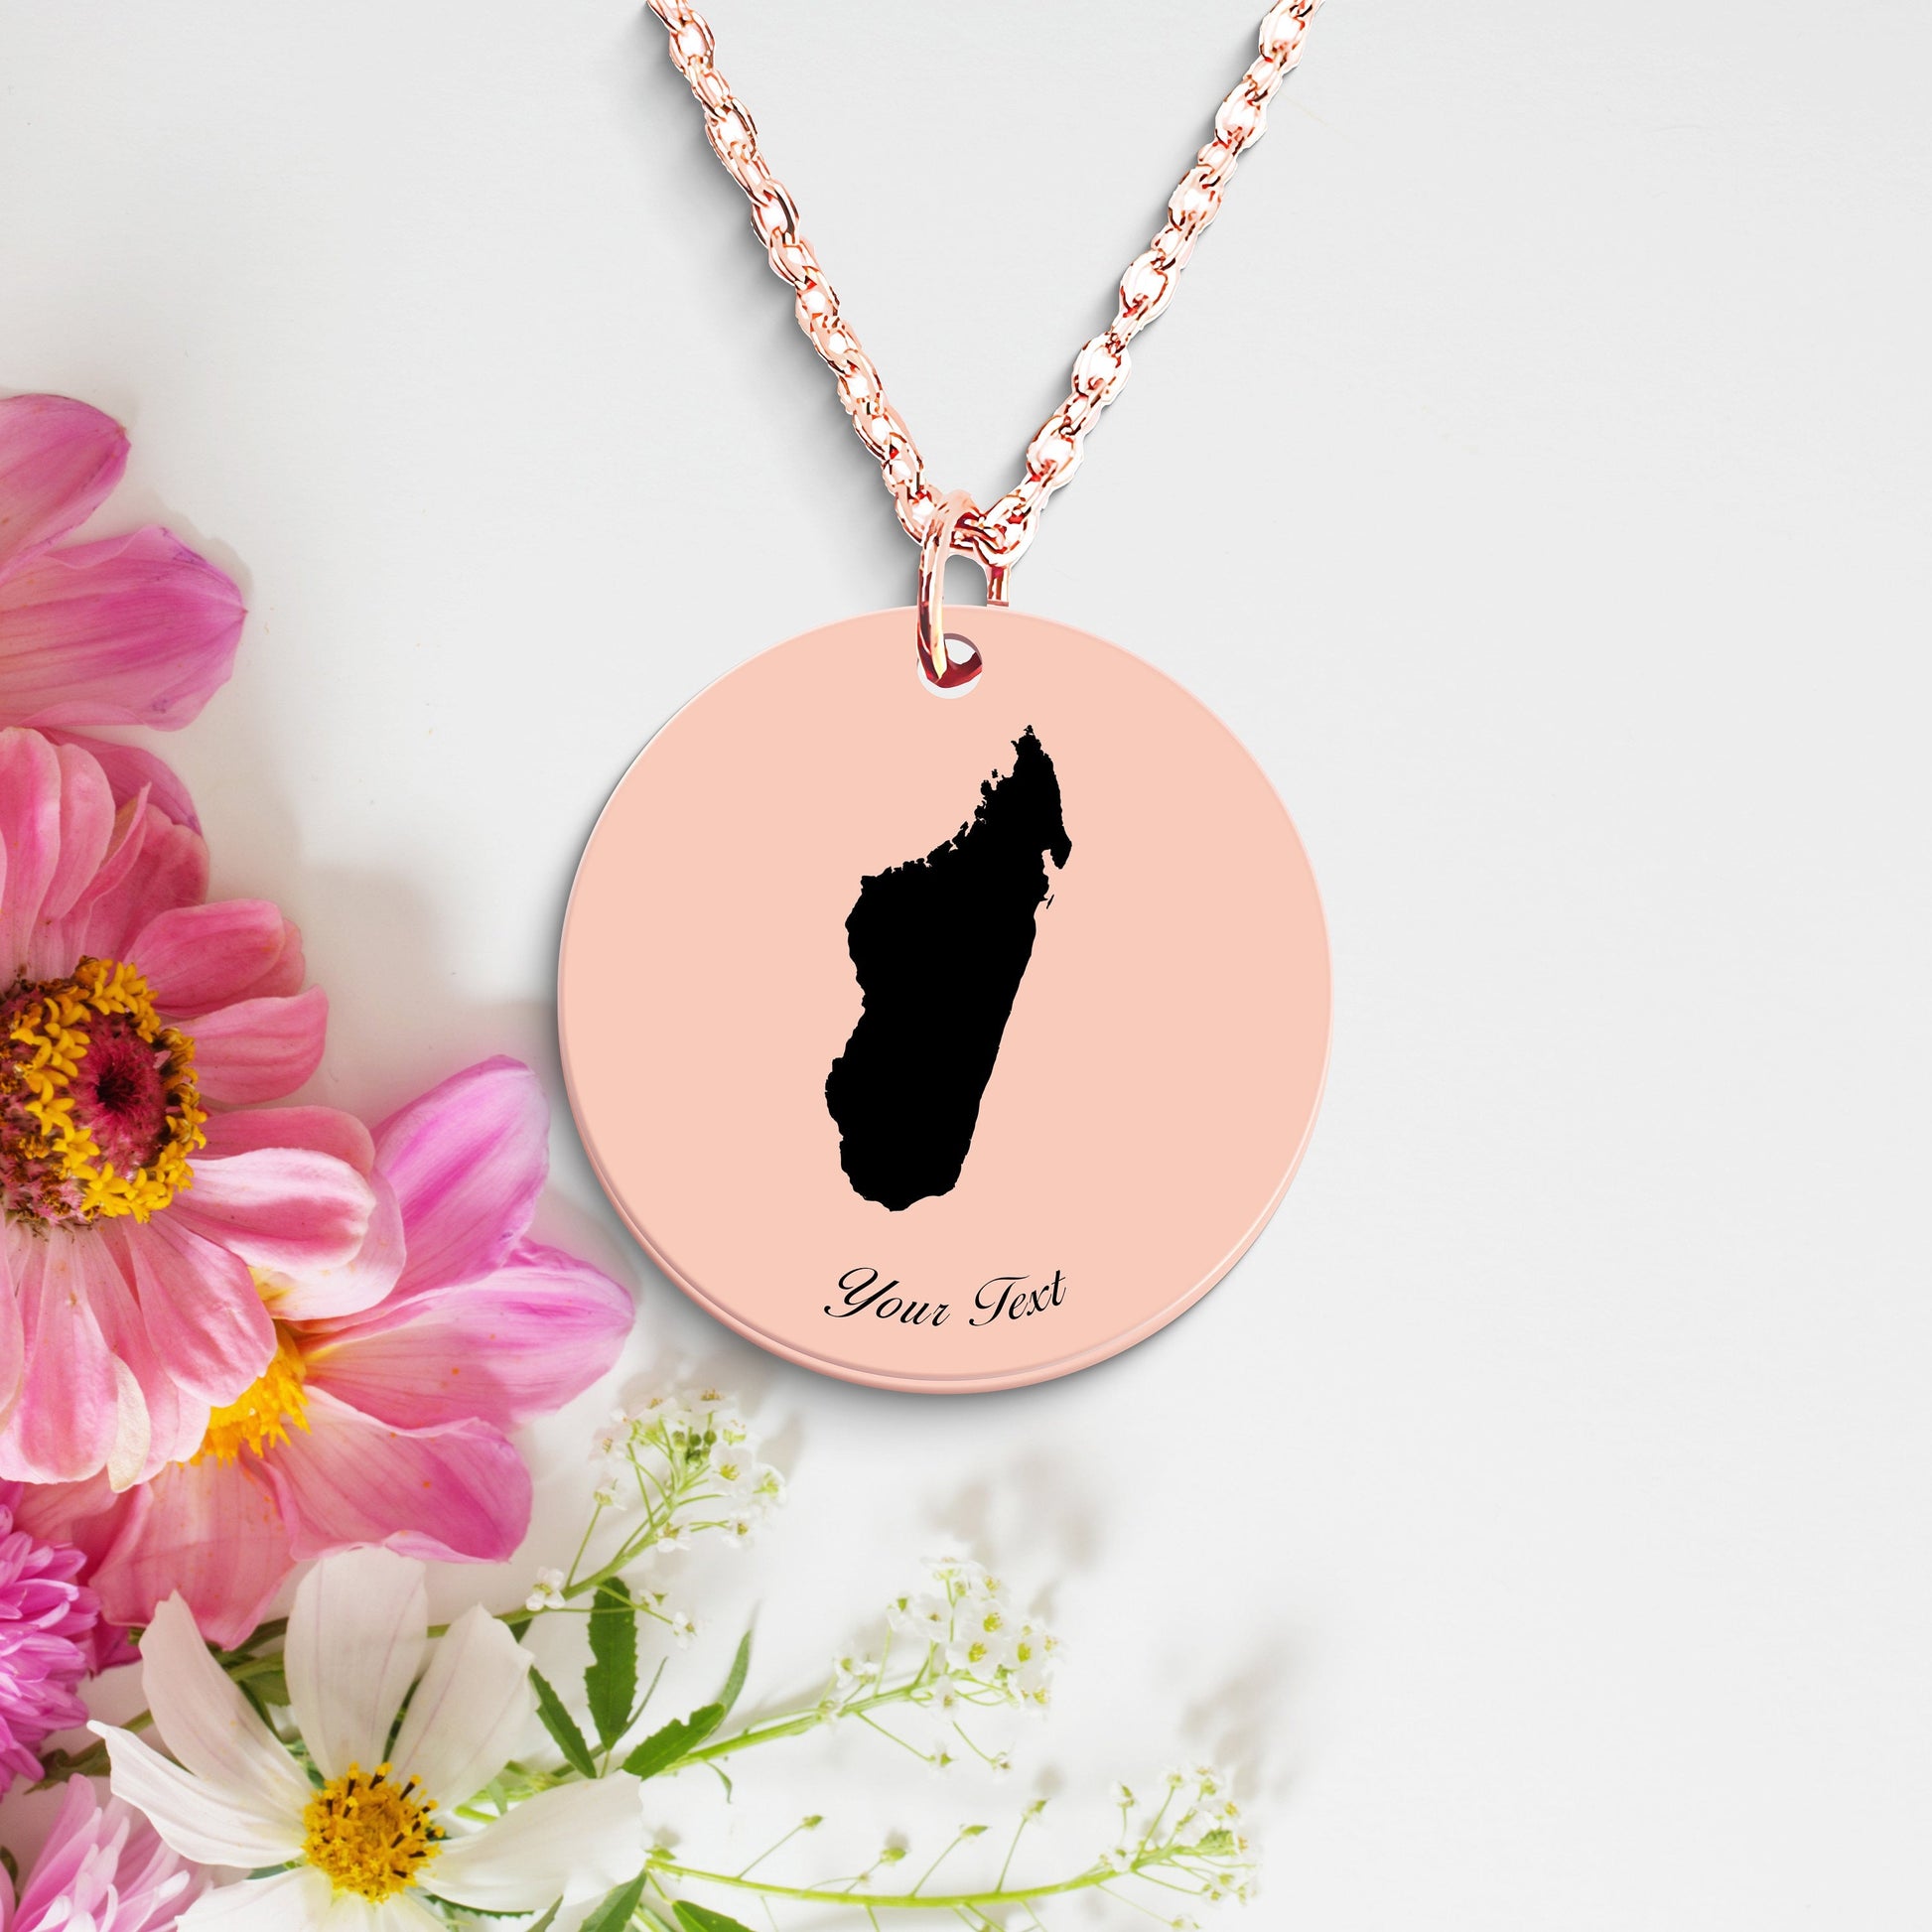 Madagascar Country Map Necklace, Your Name Necklace, Minimalist Necklace, Personalized Gift, Silver Necklace, Gift For Him Her